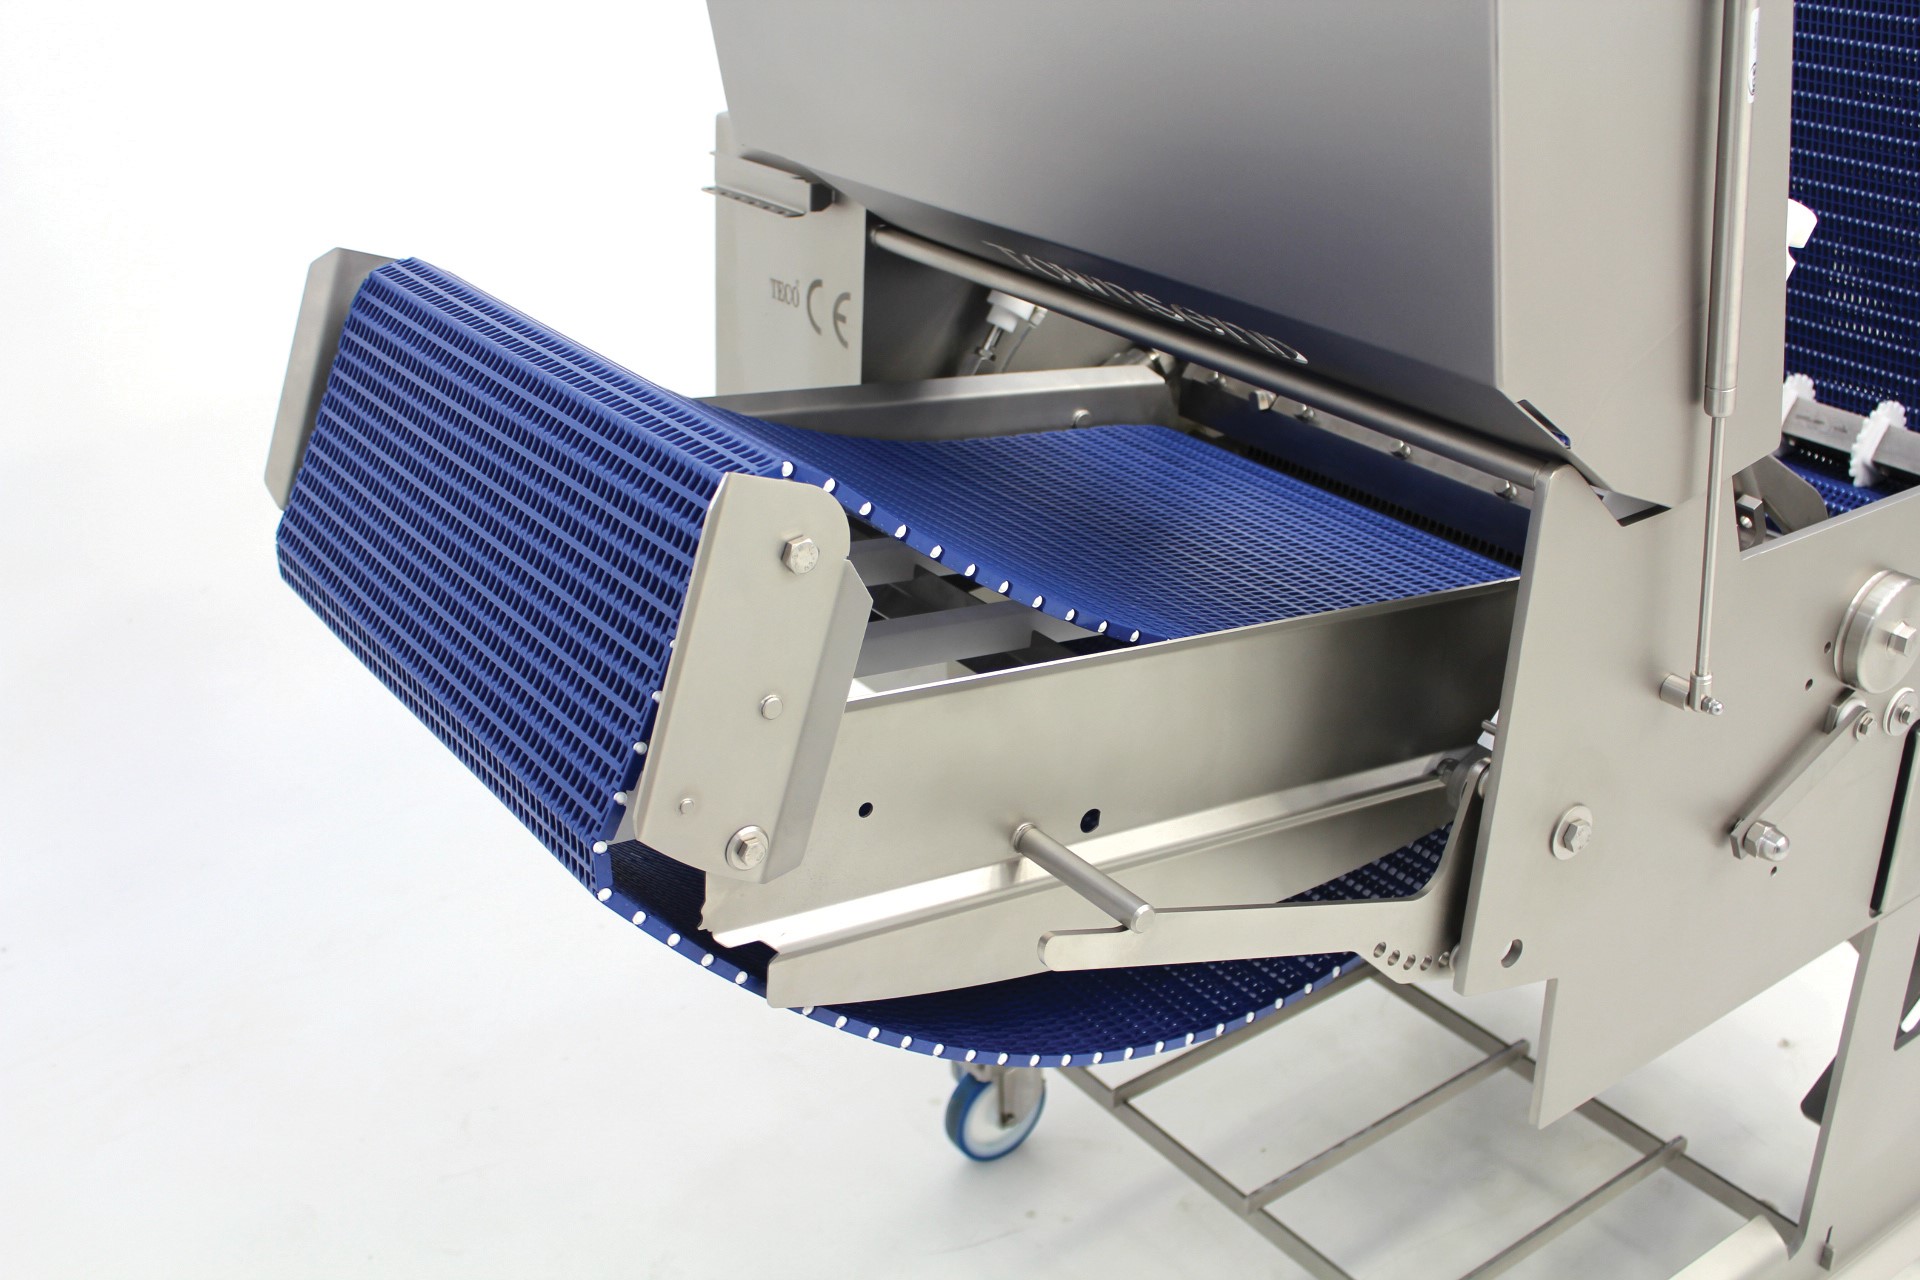 Infeed and exit conveyor are open designs with modular belting to ensure easy to breakdown for sanitation